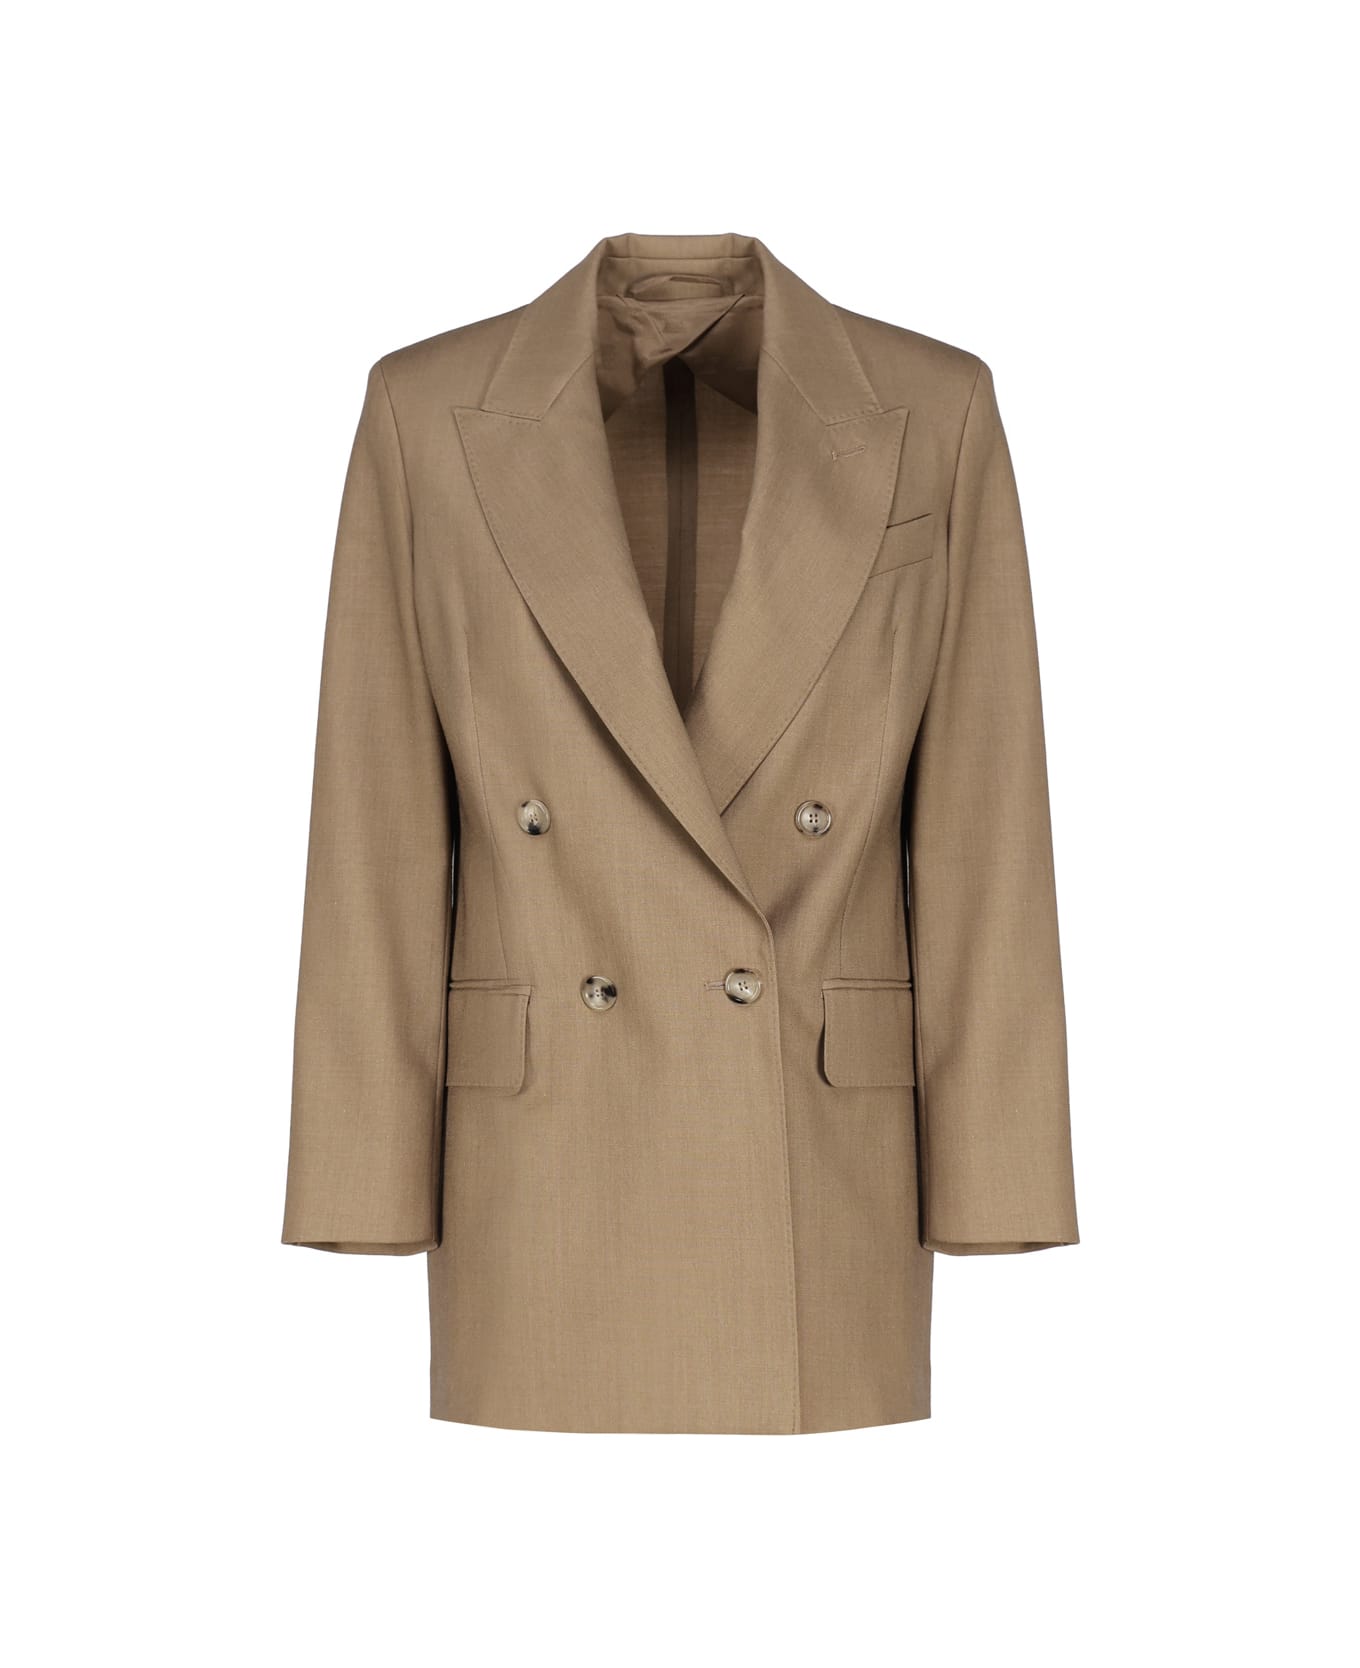 Max Mara Double Breasted Blazer In Wool Blend - Cammello